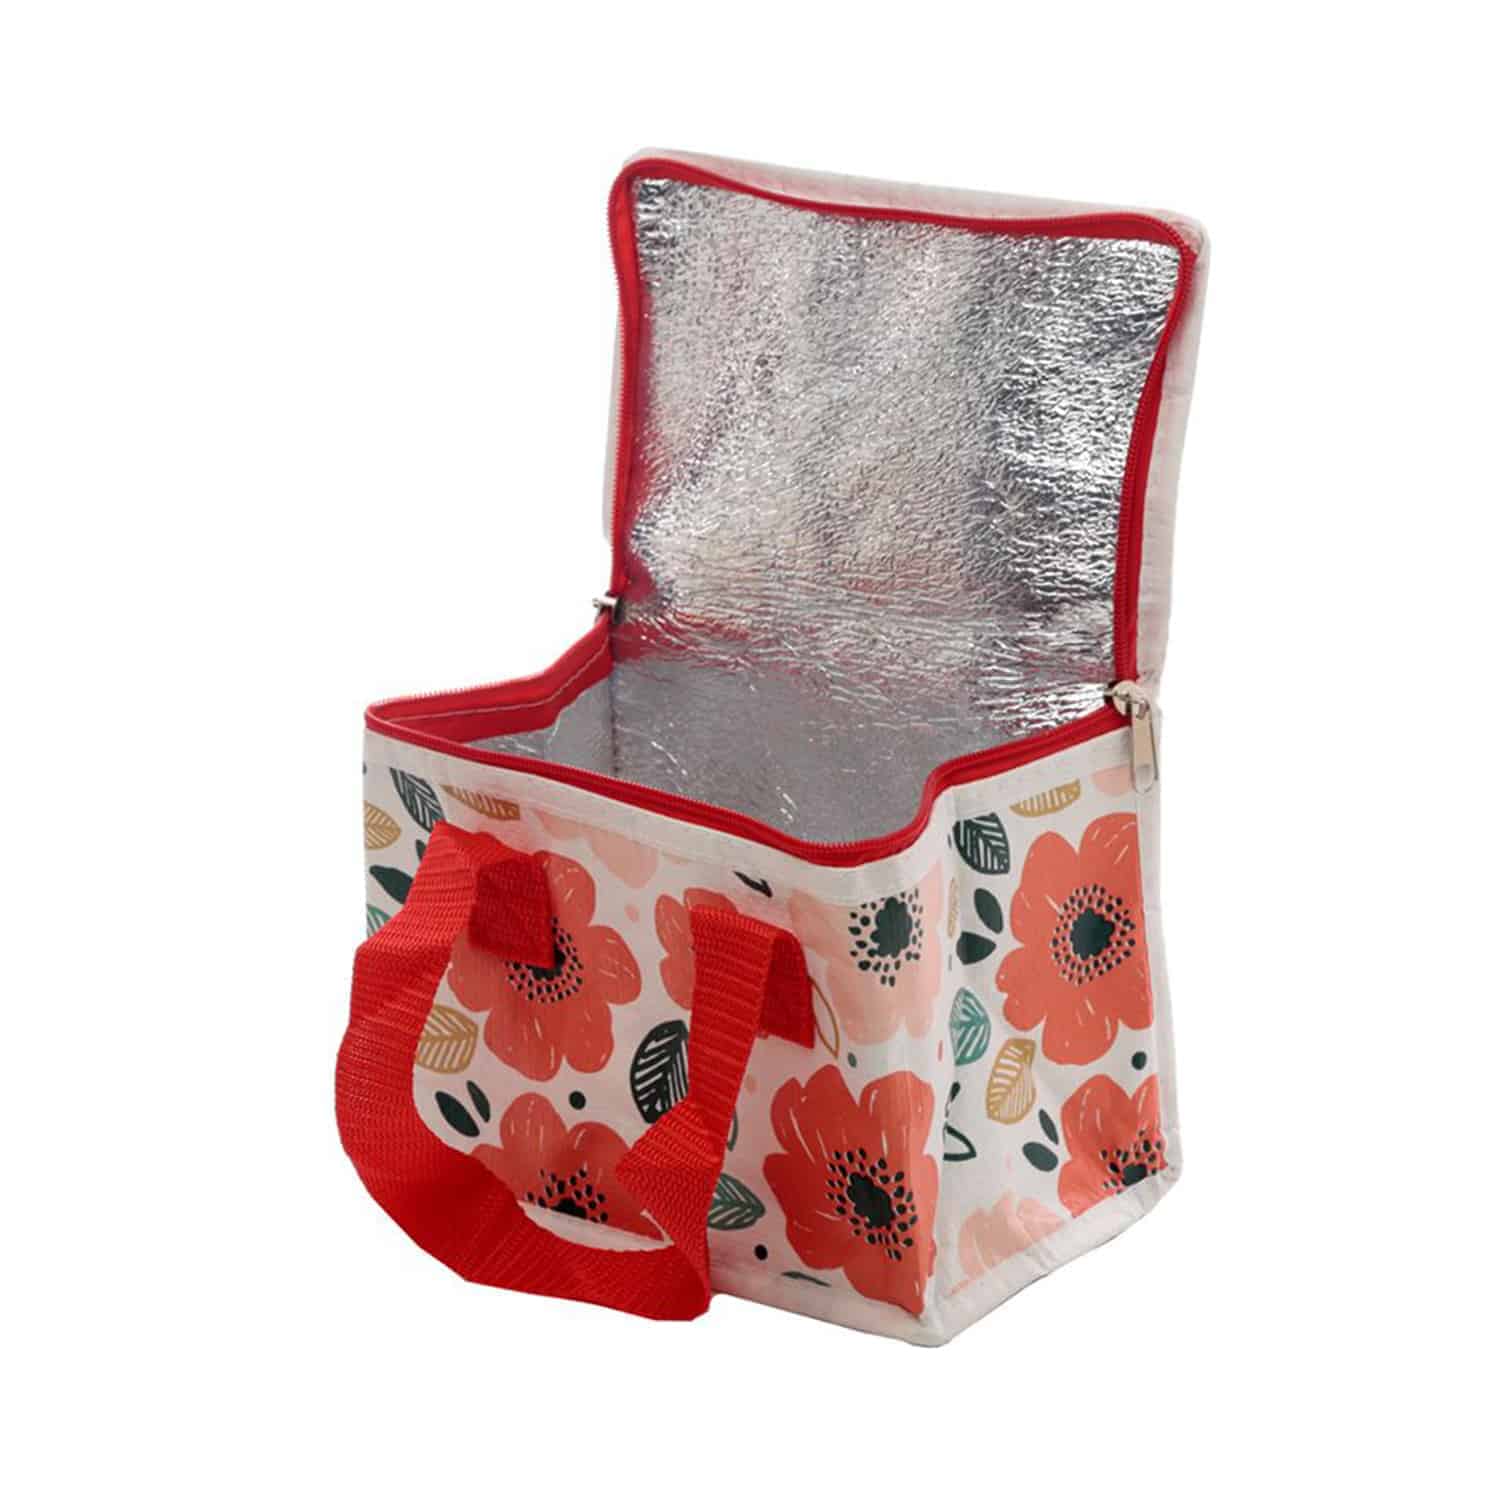 Poppy Fields Pick of the Bunch -Woven Cool Bag Lunch Box